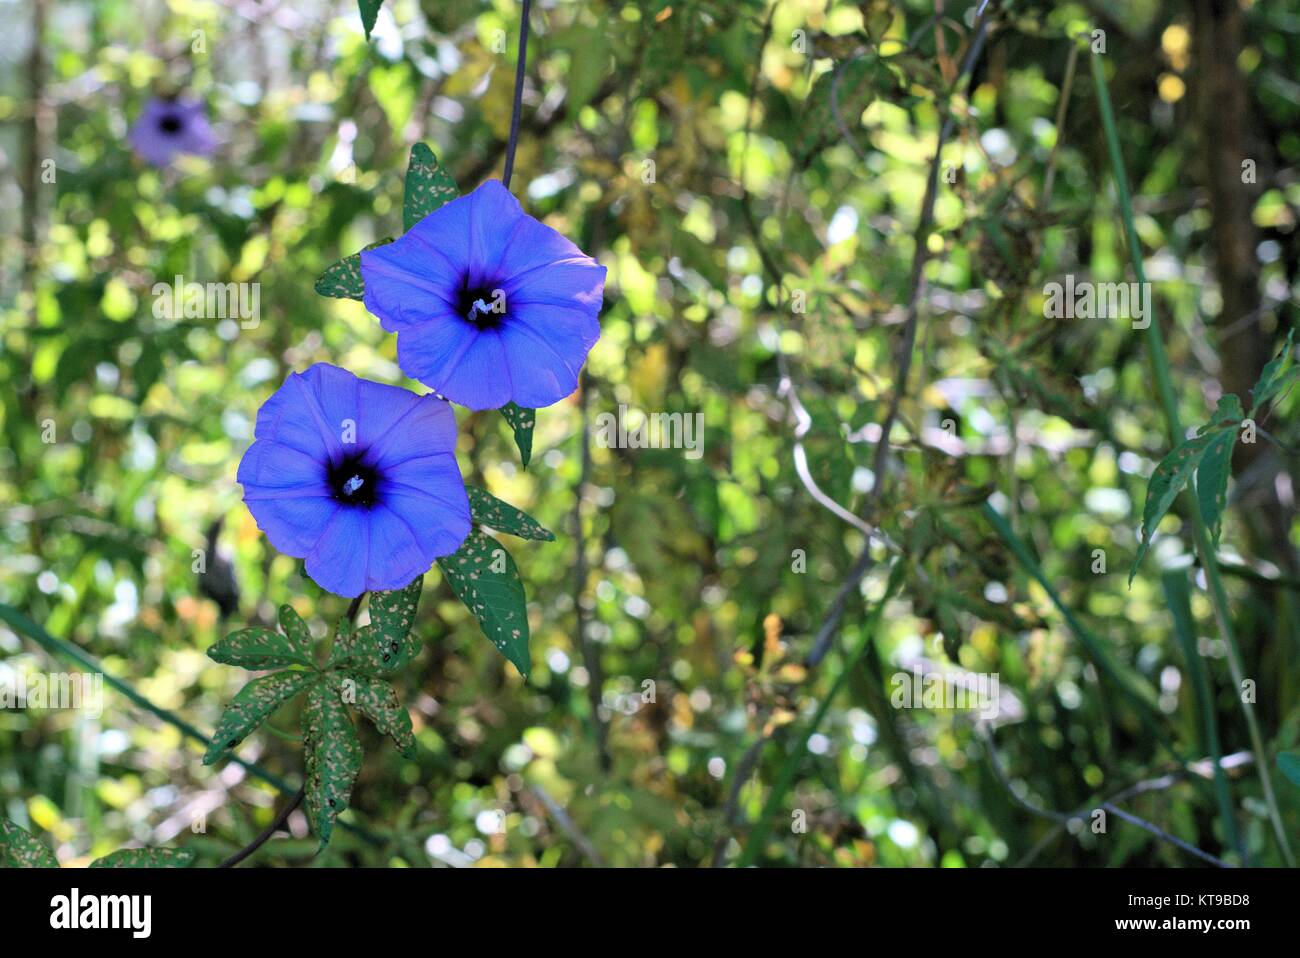 Purple flower weed found in Australia and other tropical regions of the world. Stock Photo